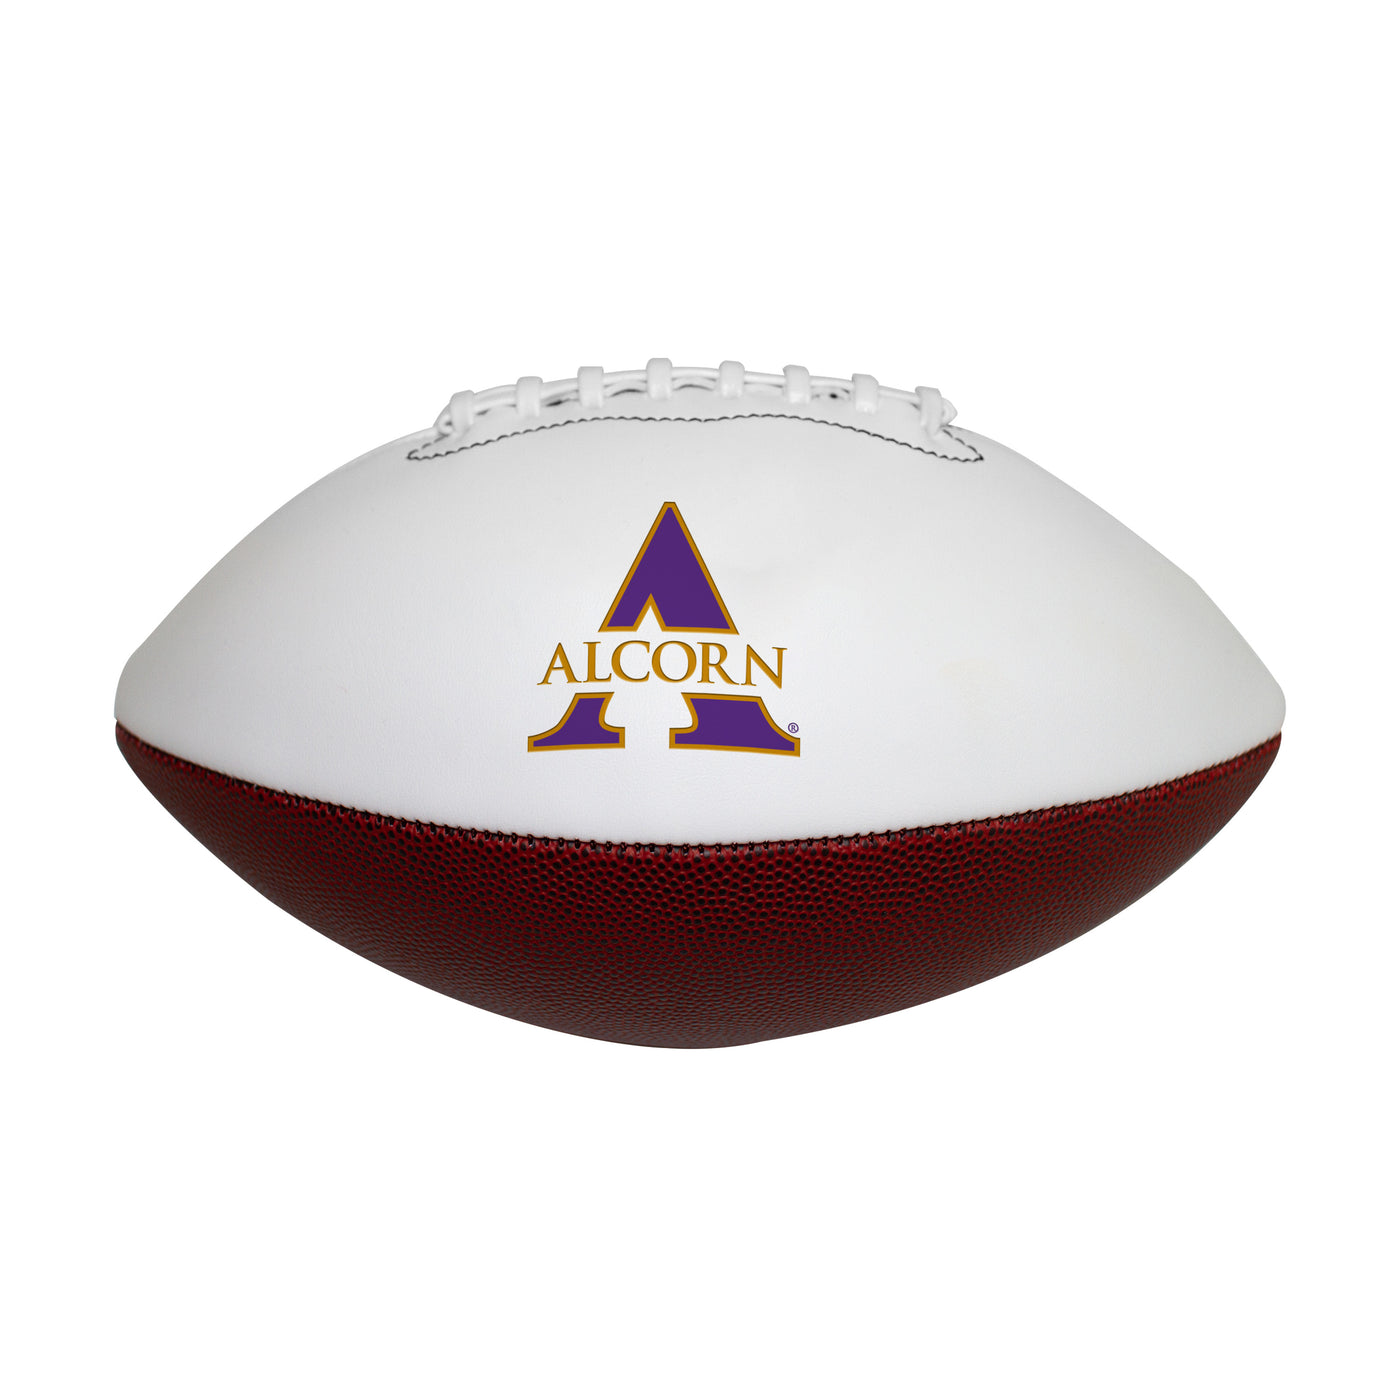 Alcorn State Official-Size Autograph Football